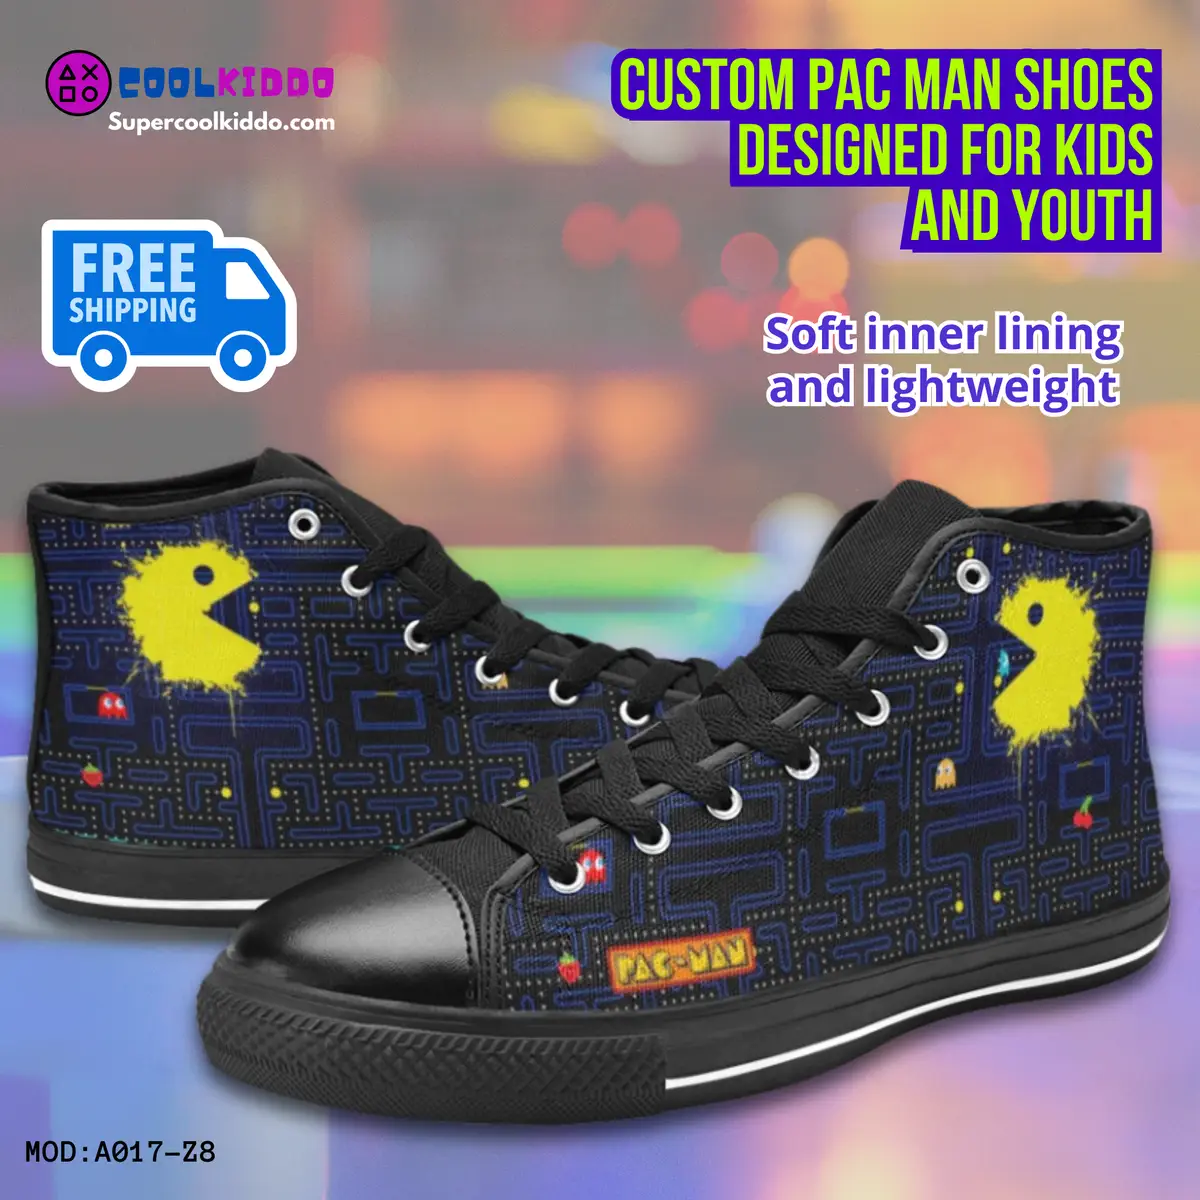 Pac Man Vintage Video Game High Top Sneakers – Custom Canvas Shoes for Kids/Youth Cool Kiddo 12